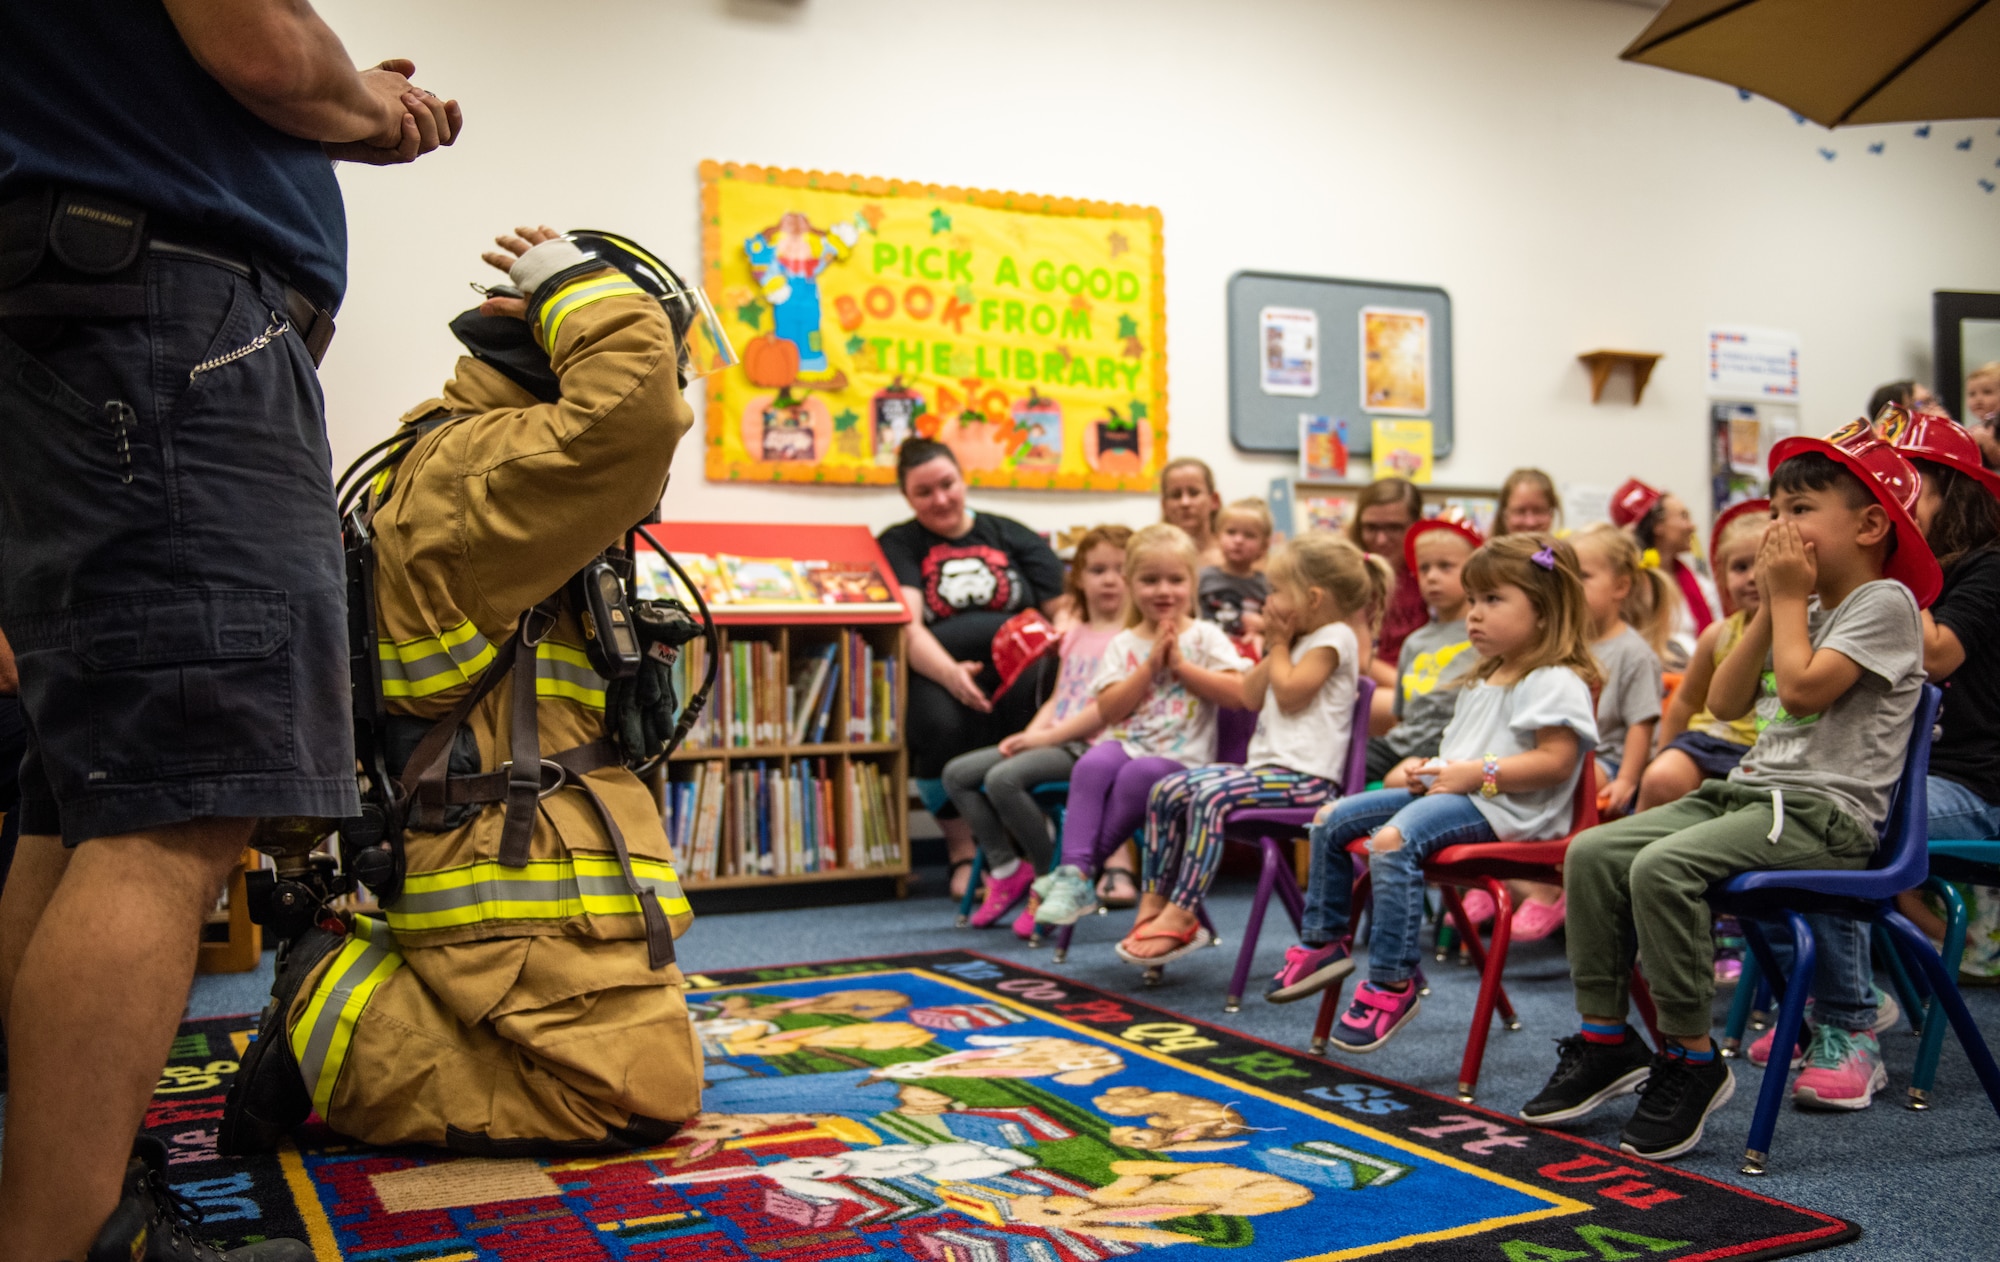 Luke Air Force Base firefighters demonstrate the proper wear of firefighting equipment during their visit to the base library as part of Fire Prevention Week Oct. 3, 2018, at Luke AFB, Ariz. Throughout Fire Prevention Week, activities will be held on base for Airmen and their families to receive information on preventative measures they can take to exercise fire safety. (U.S. Air Force photo by Senior Airman Alexander Cook)